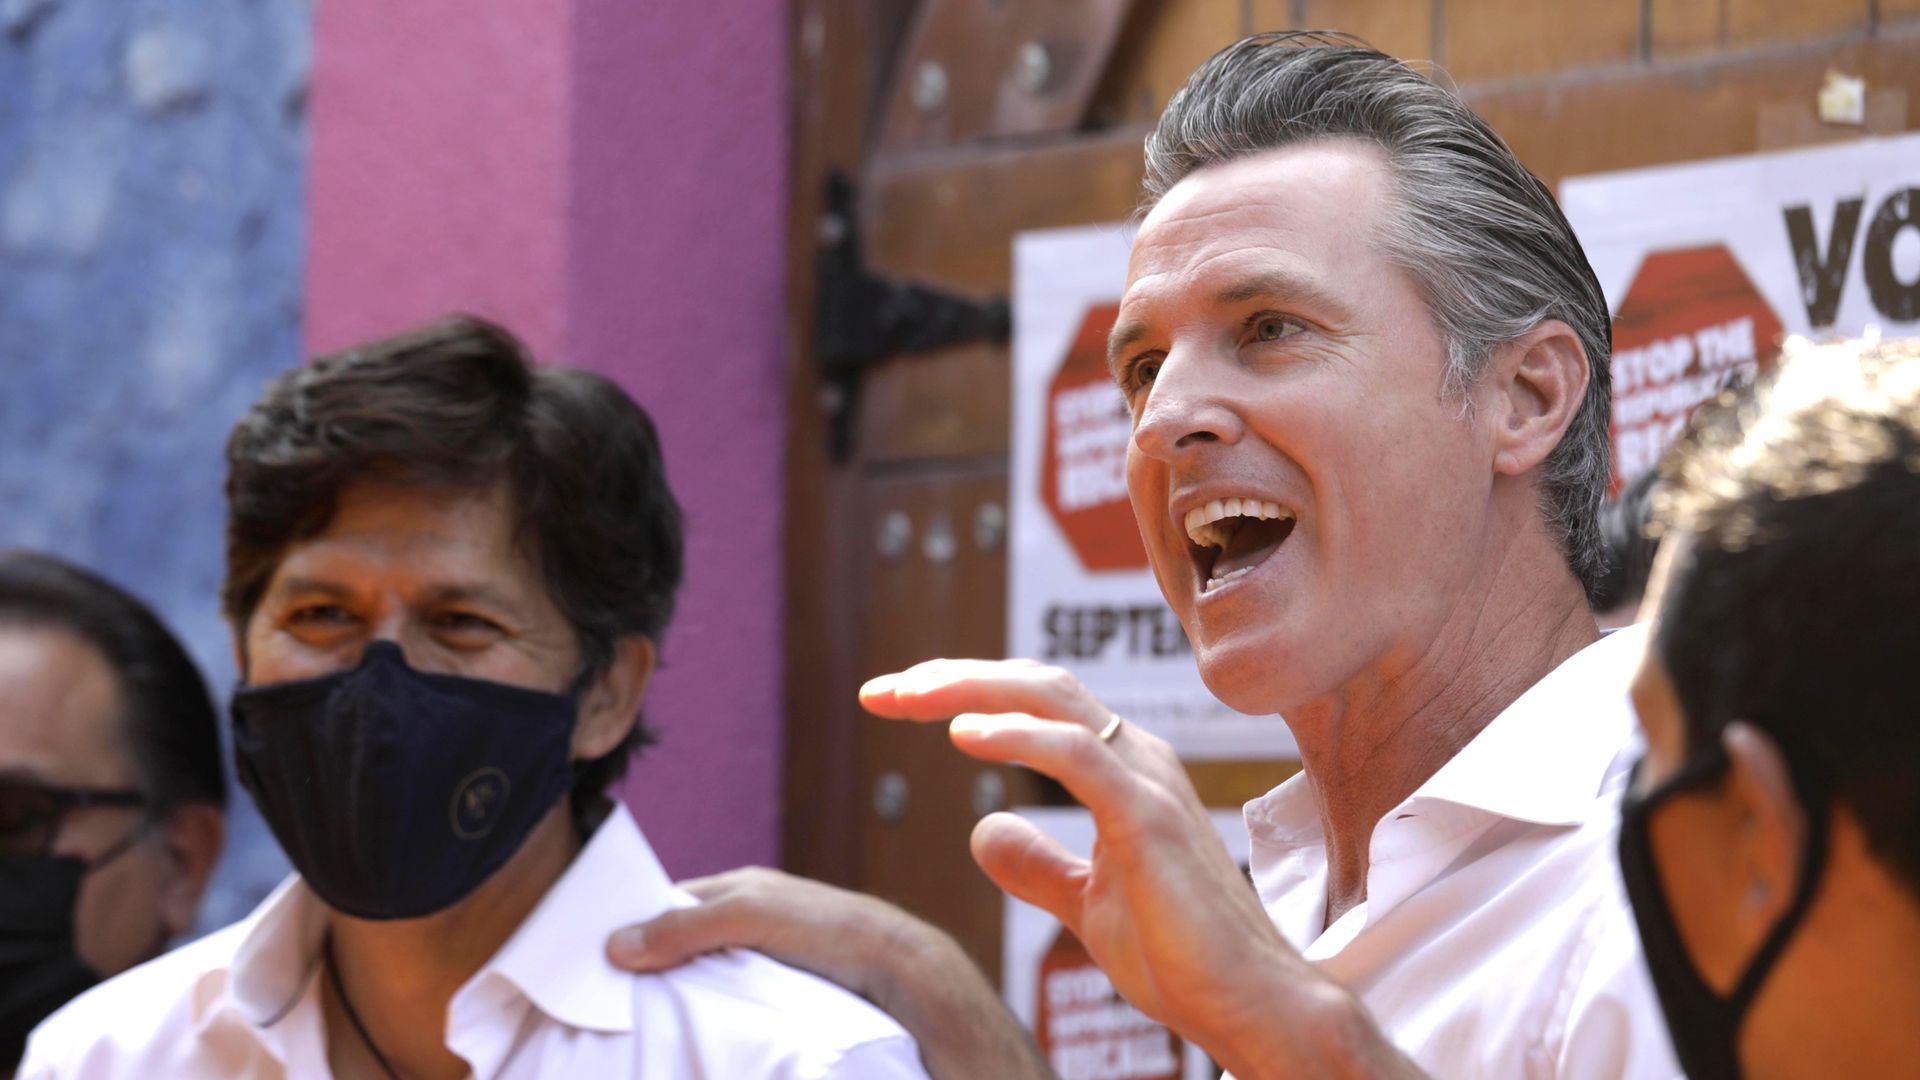 California Gov. Gavin Newsom makes a statement against his recall while meeting with Latino leaders at Hecho en Mexico restaurant in East Los Angeles.